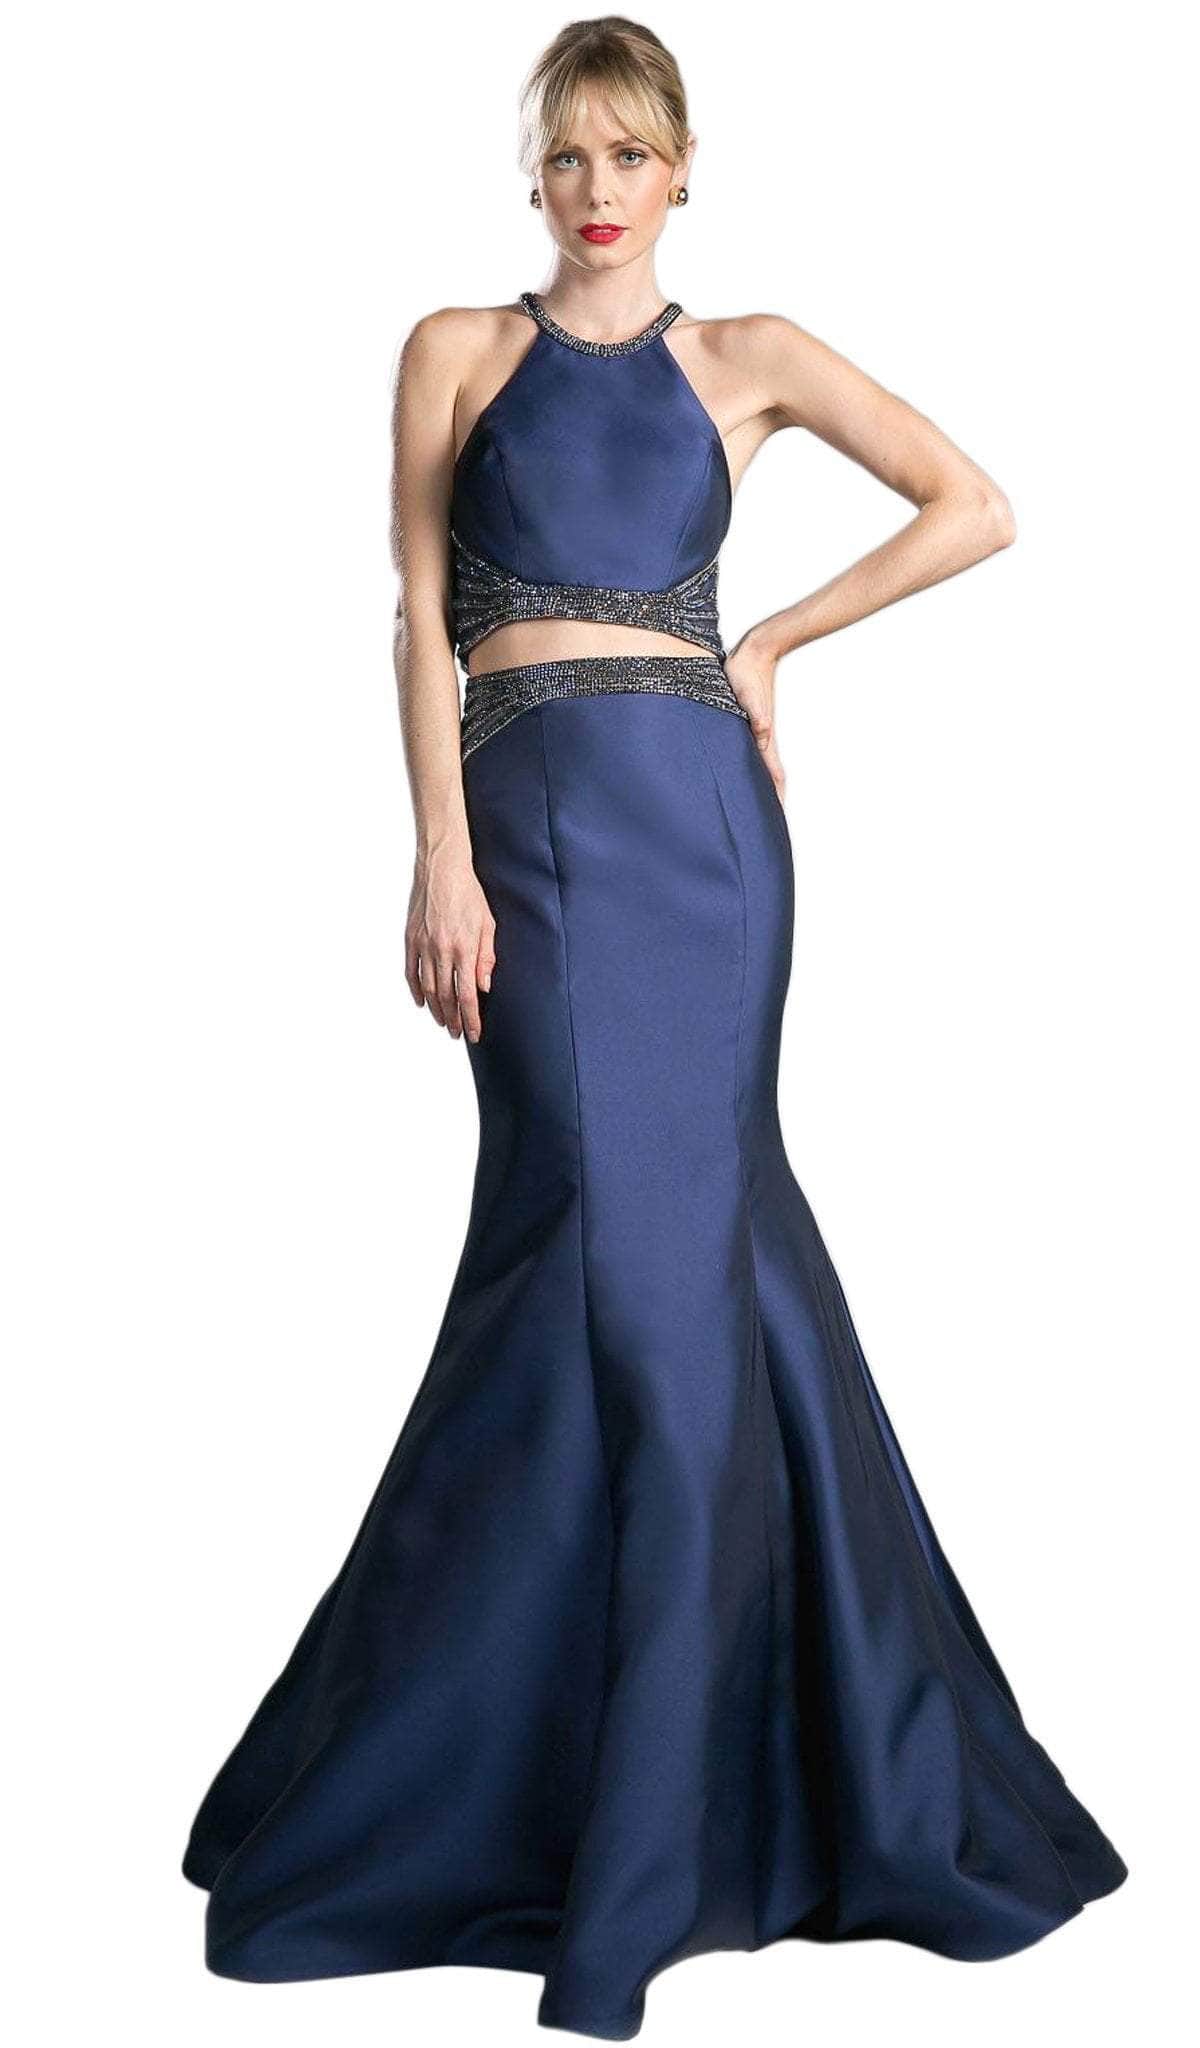 Image of Ladivine CB0023 - Halter Neck Beaded Two-Piece Mermaid Gown